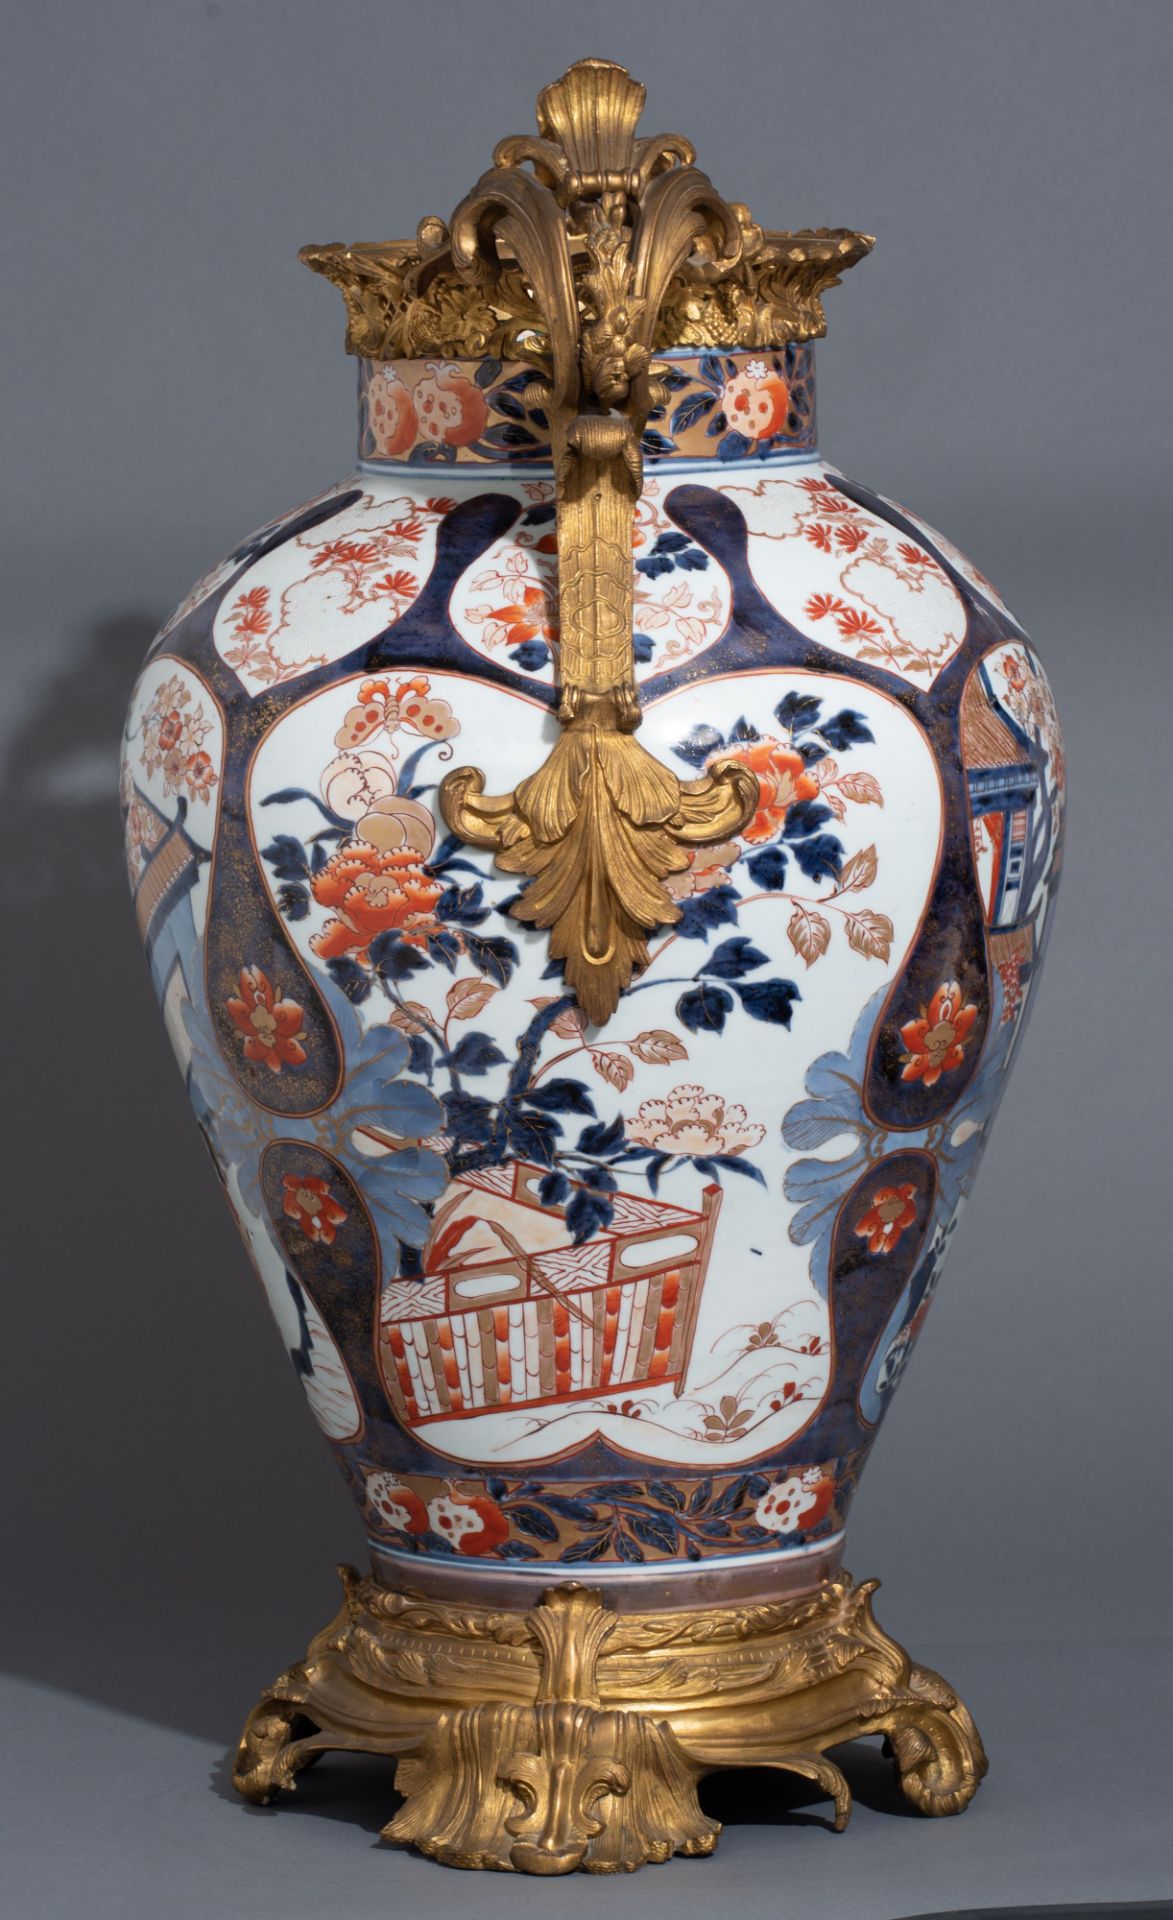 An imposing Japanese Imari cover vase, with gilt bronze mounts, late 18thC, H 109,8 cm - Image 11 of 21